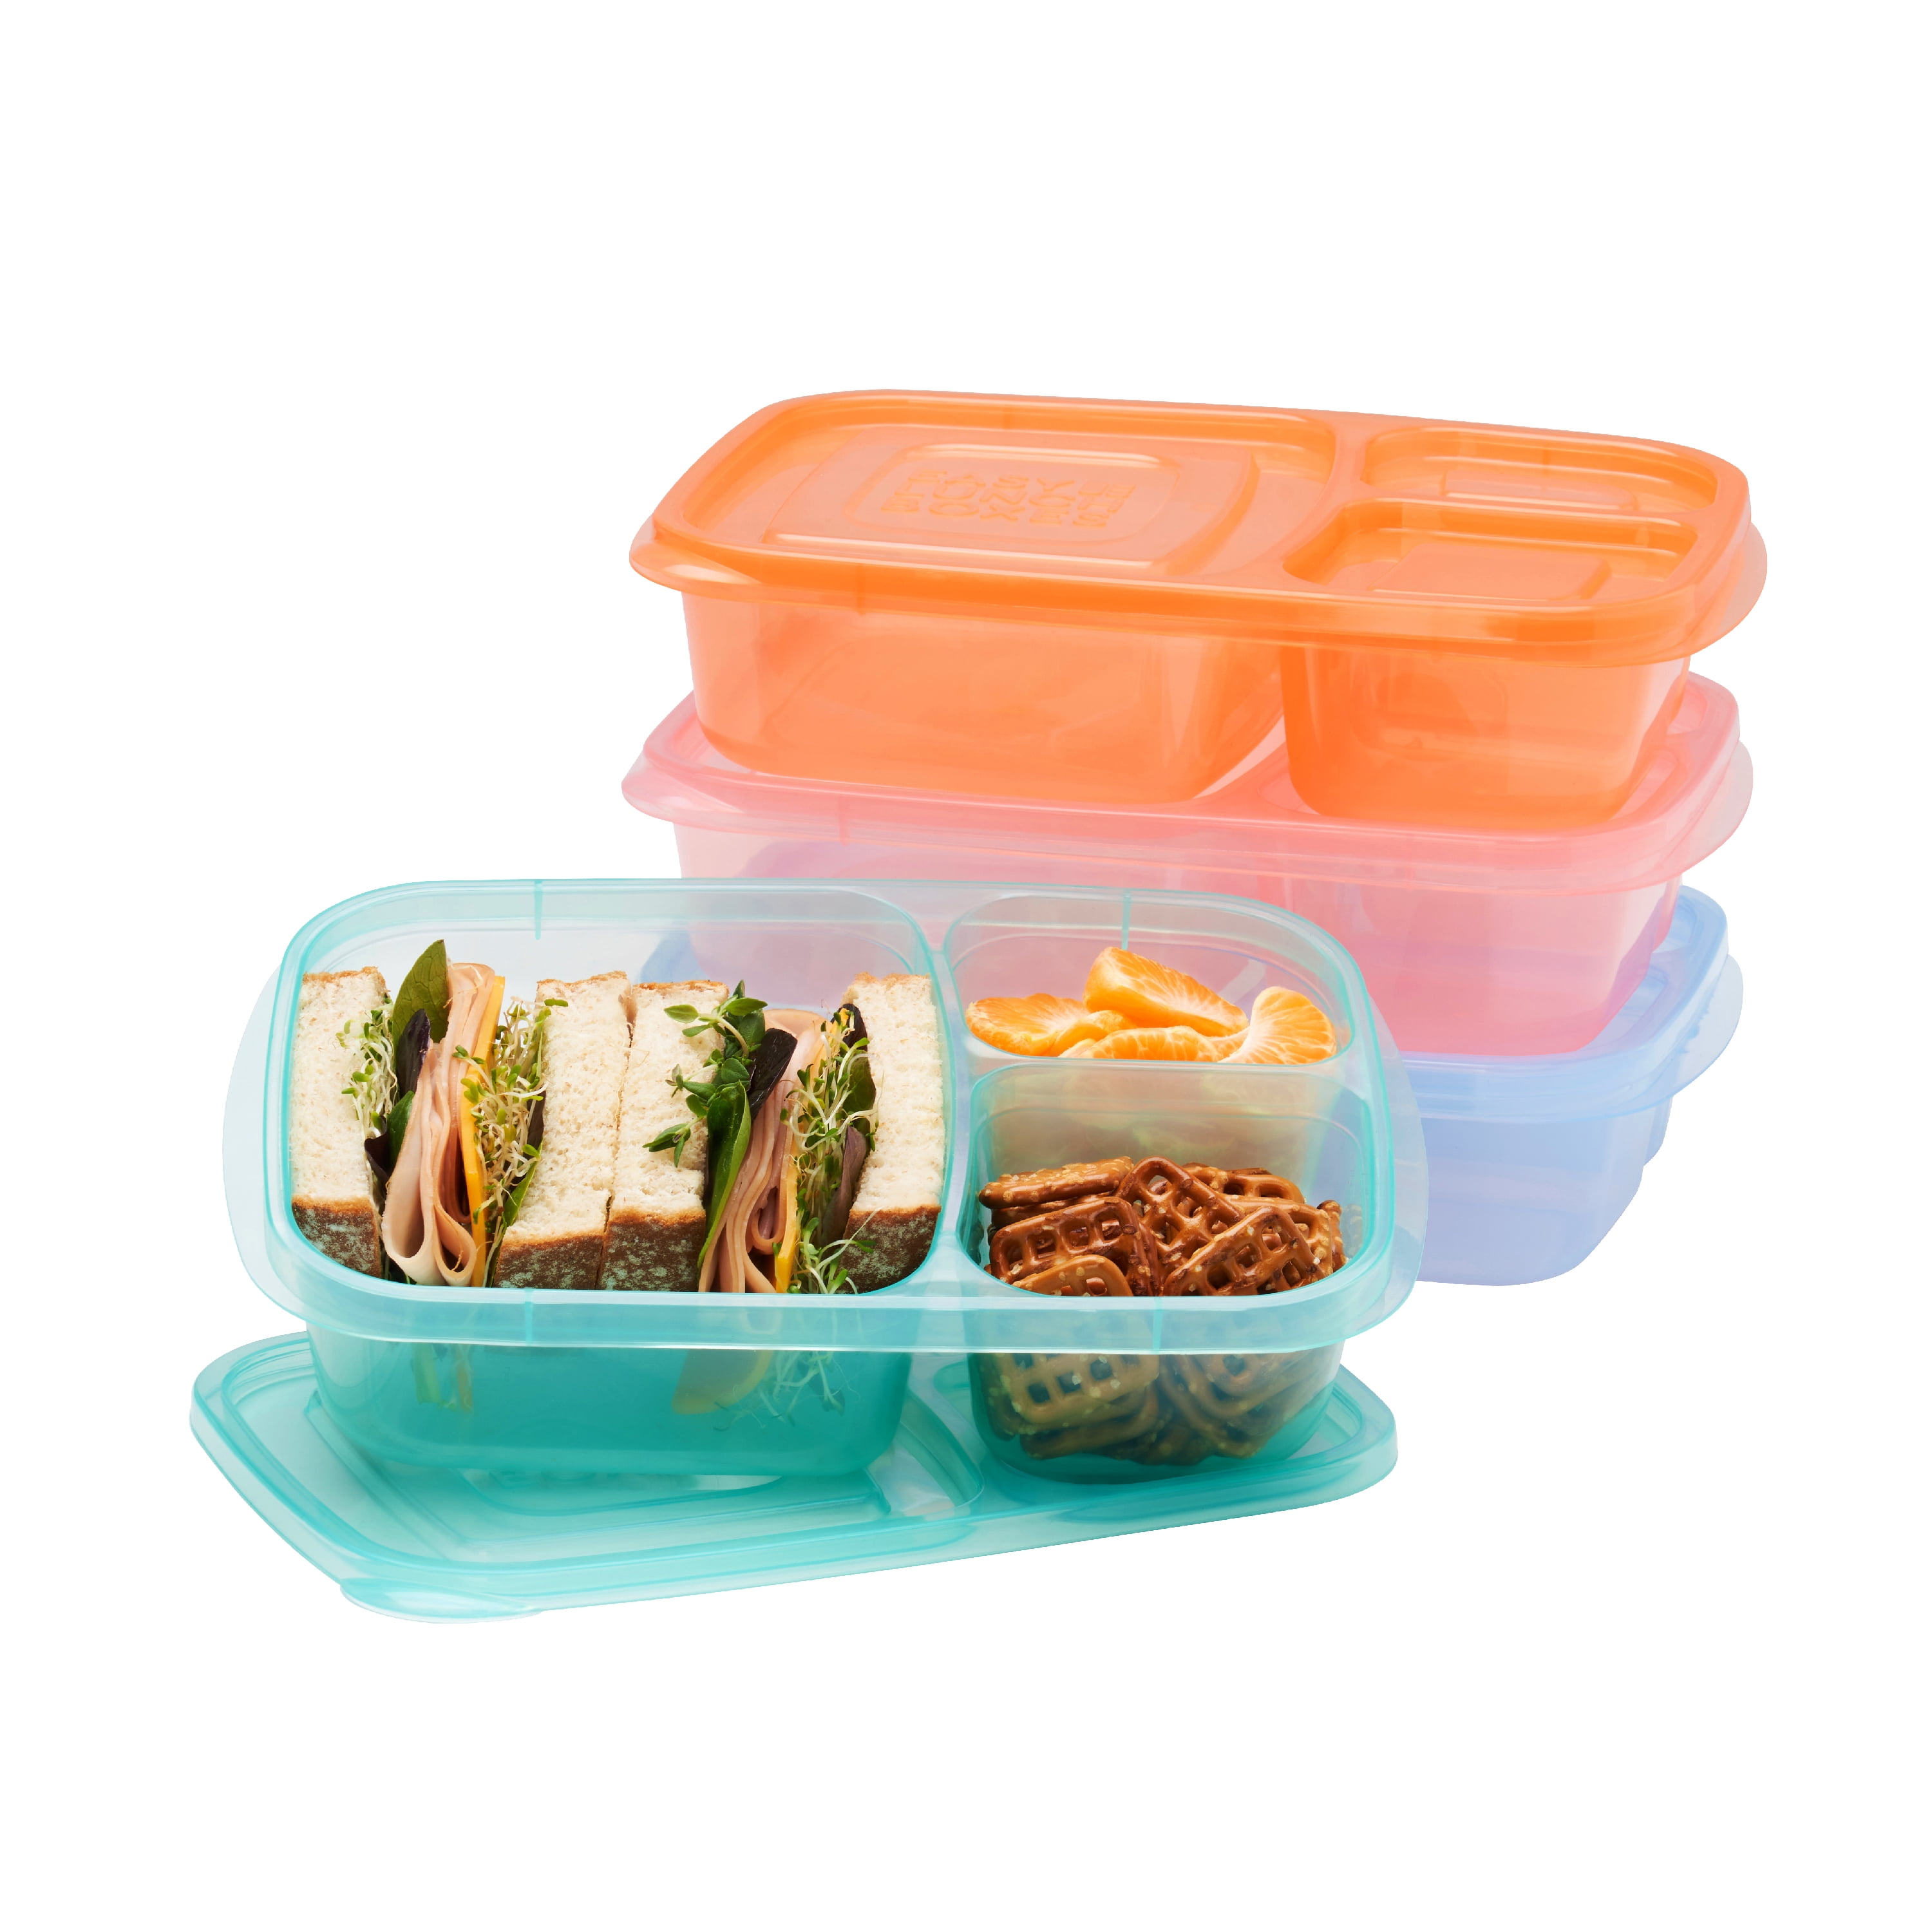 EasyLunchboxes - Bento Lunch Boxes - Reusable 3-Compartment Food Containers  for School, Work, and Travel, Set of 4, (Pastels)